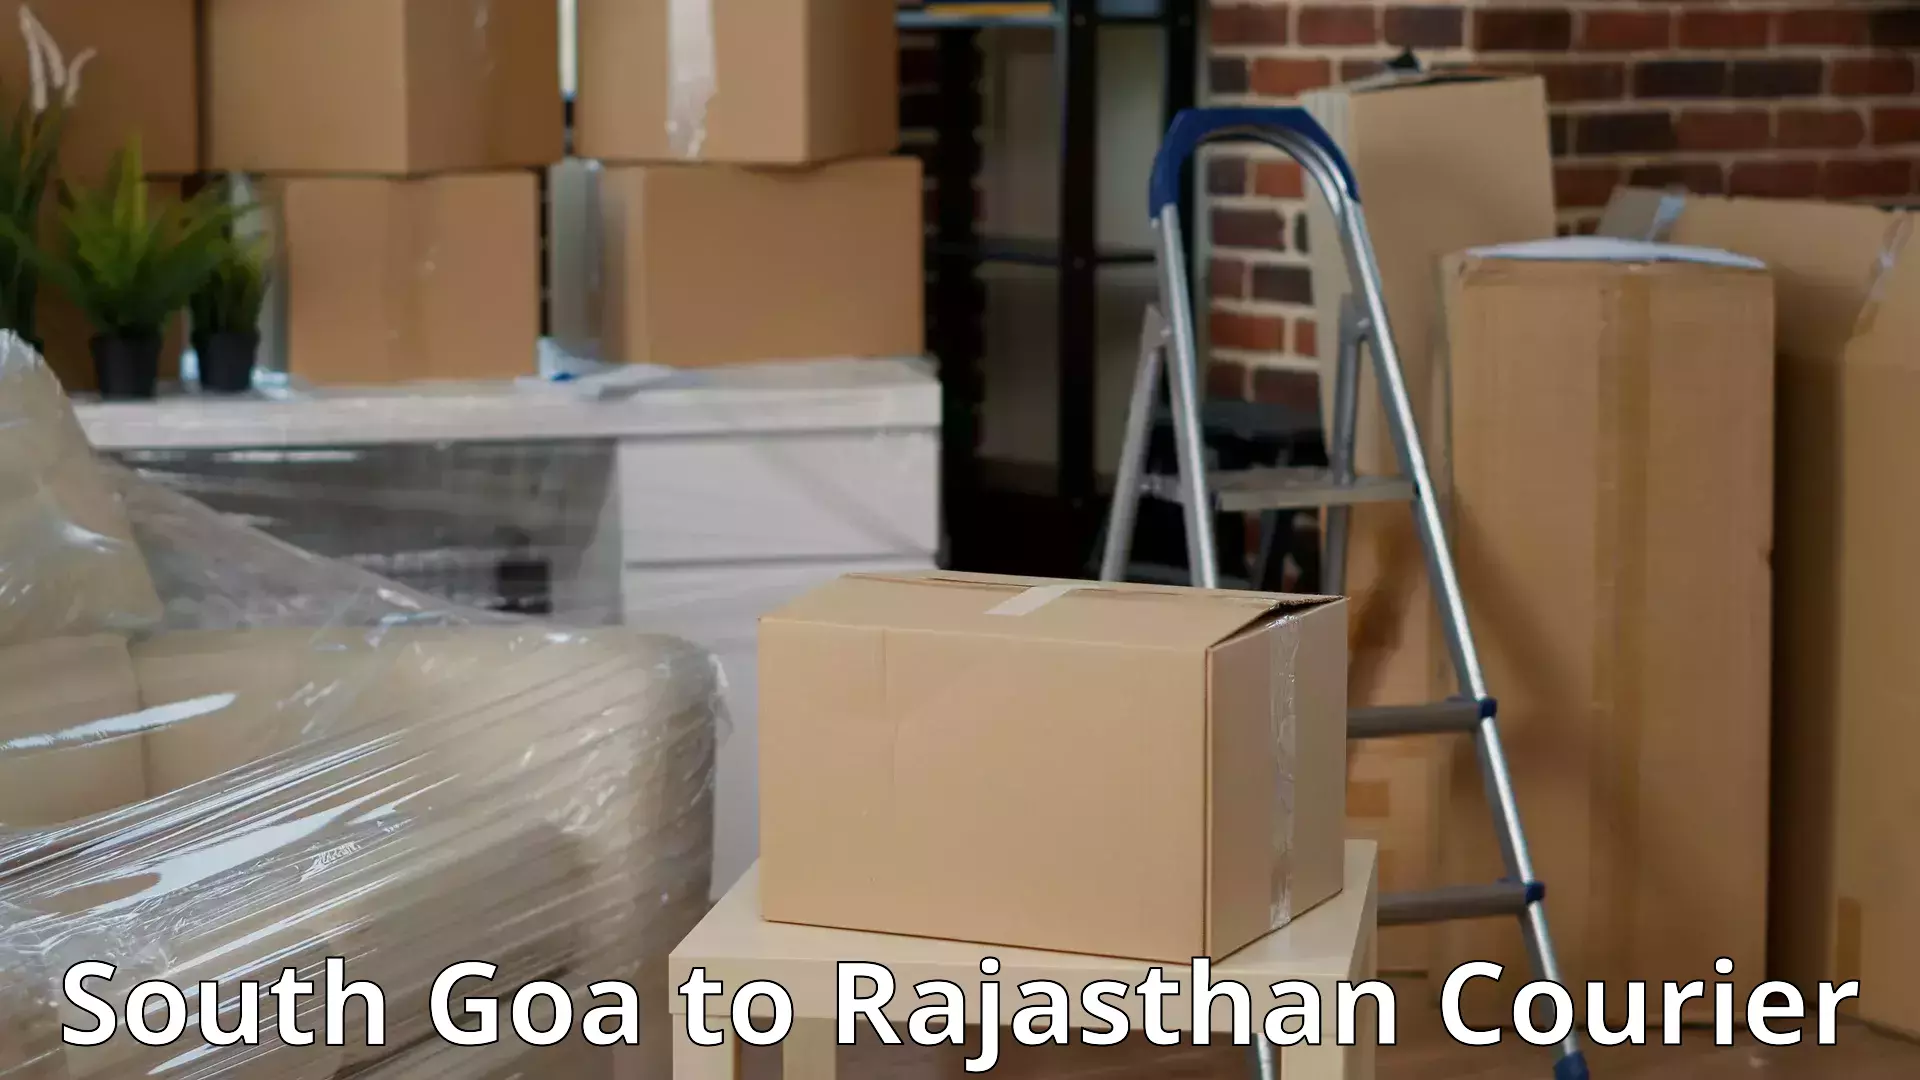 Moving and storage services South Goa to Pratapgarh Rajasthan